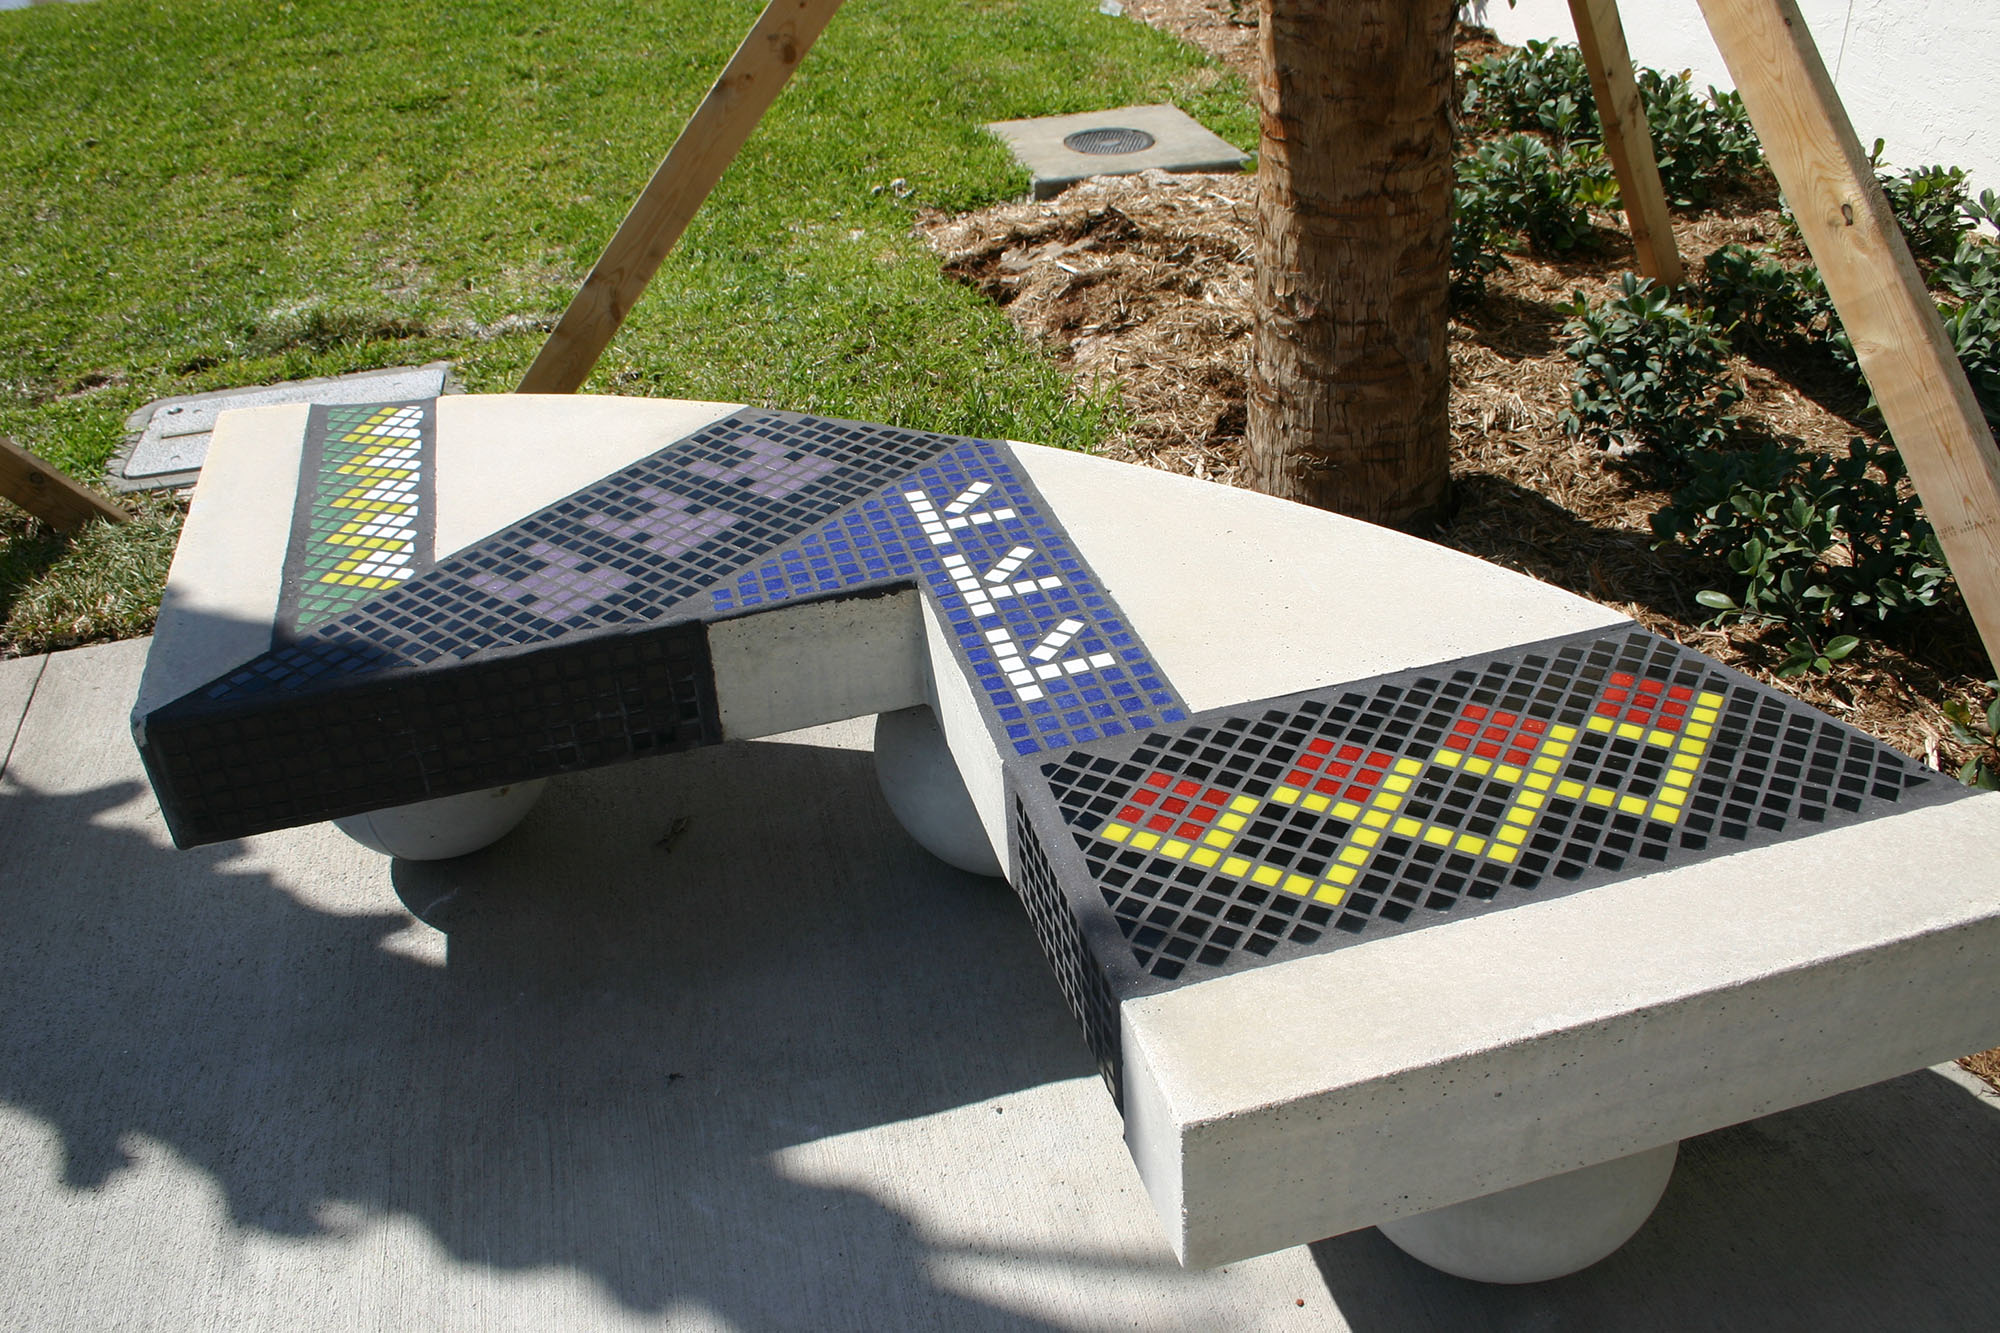 Public art mosaic bench with blue, black, green, yellow, and red colored glass in a traditional style.